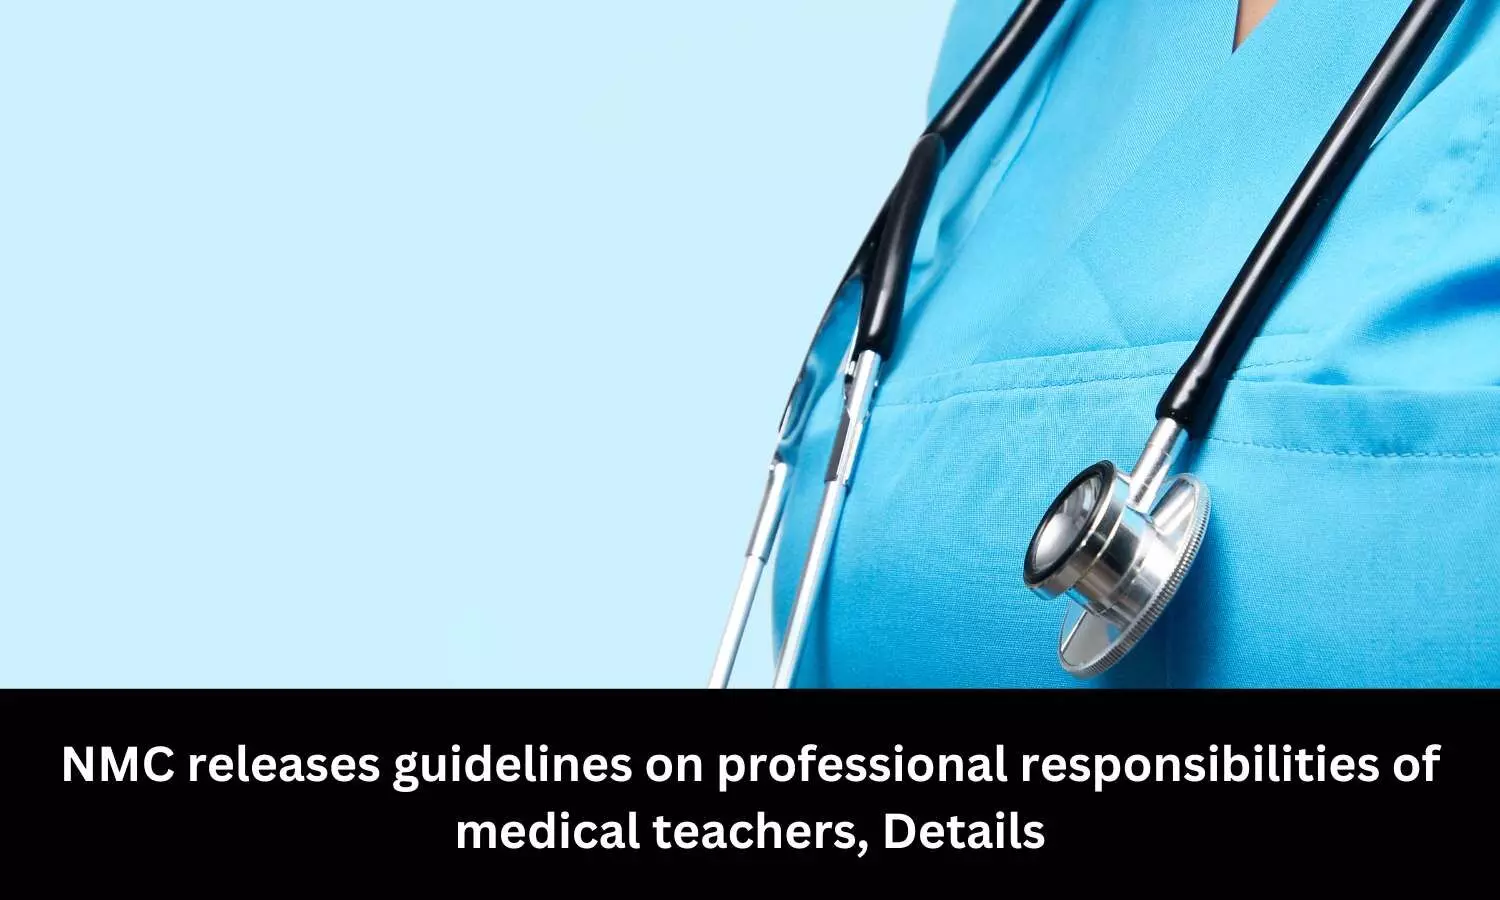 NMC issues guidelines on Professional Responsibilities of Medical Teachers